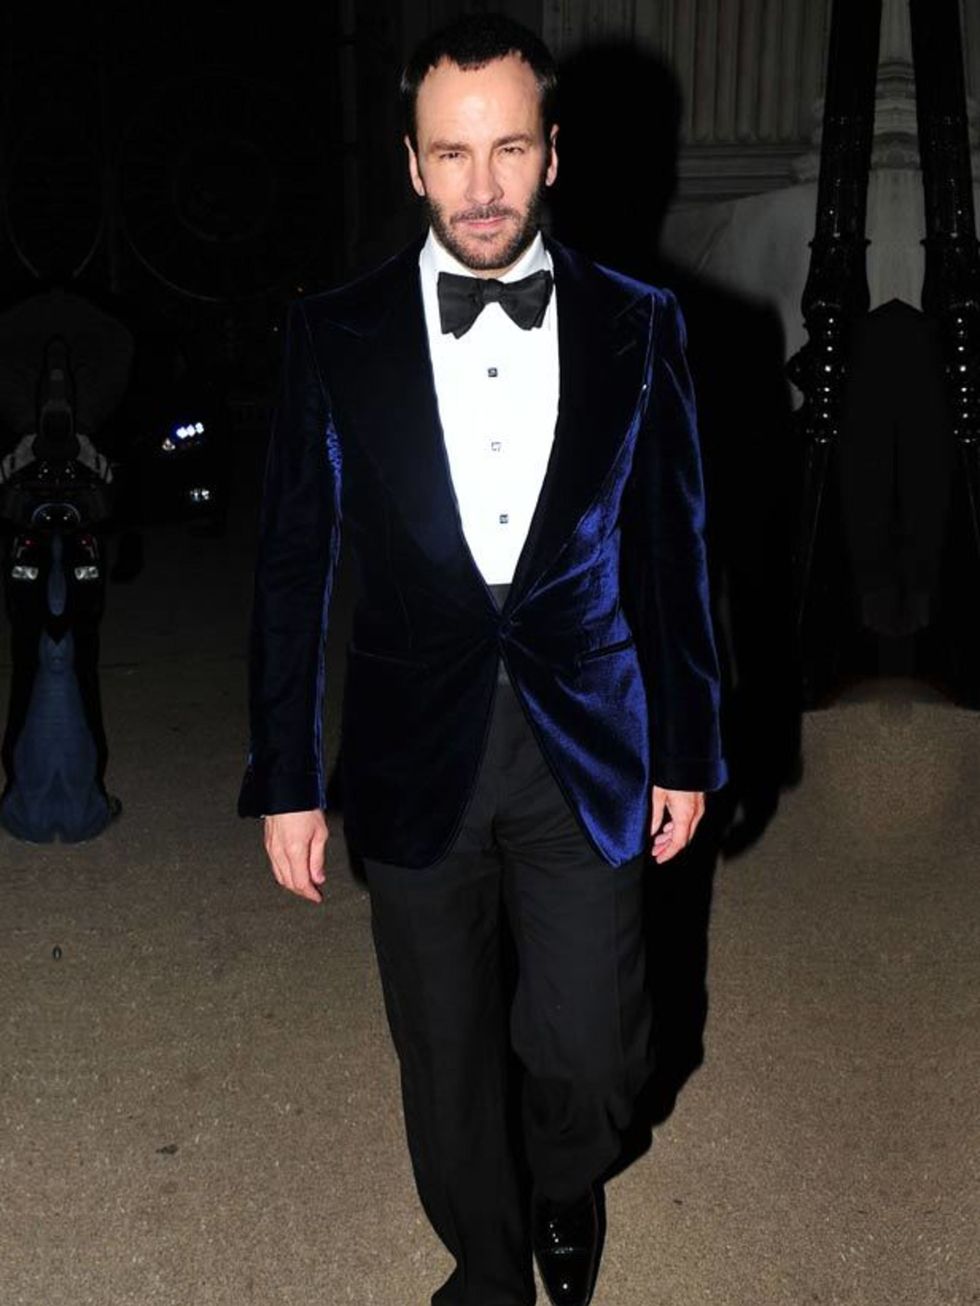 <p><a href="http://www.elleuk.com/content/search?SearchText=tom+ford&amp;SearchButton=Search">Tom Ford</a> in a velvet tux at Asprey House - Number One to celebrate Stella McCartney's 40th Birthday, 13 September 2011</p>